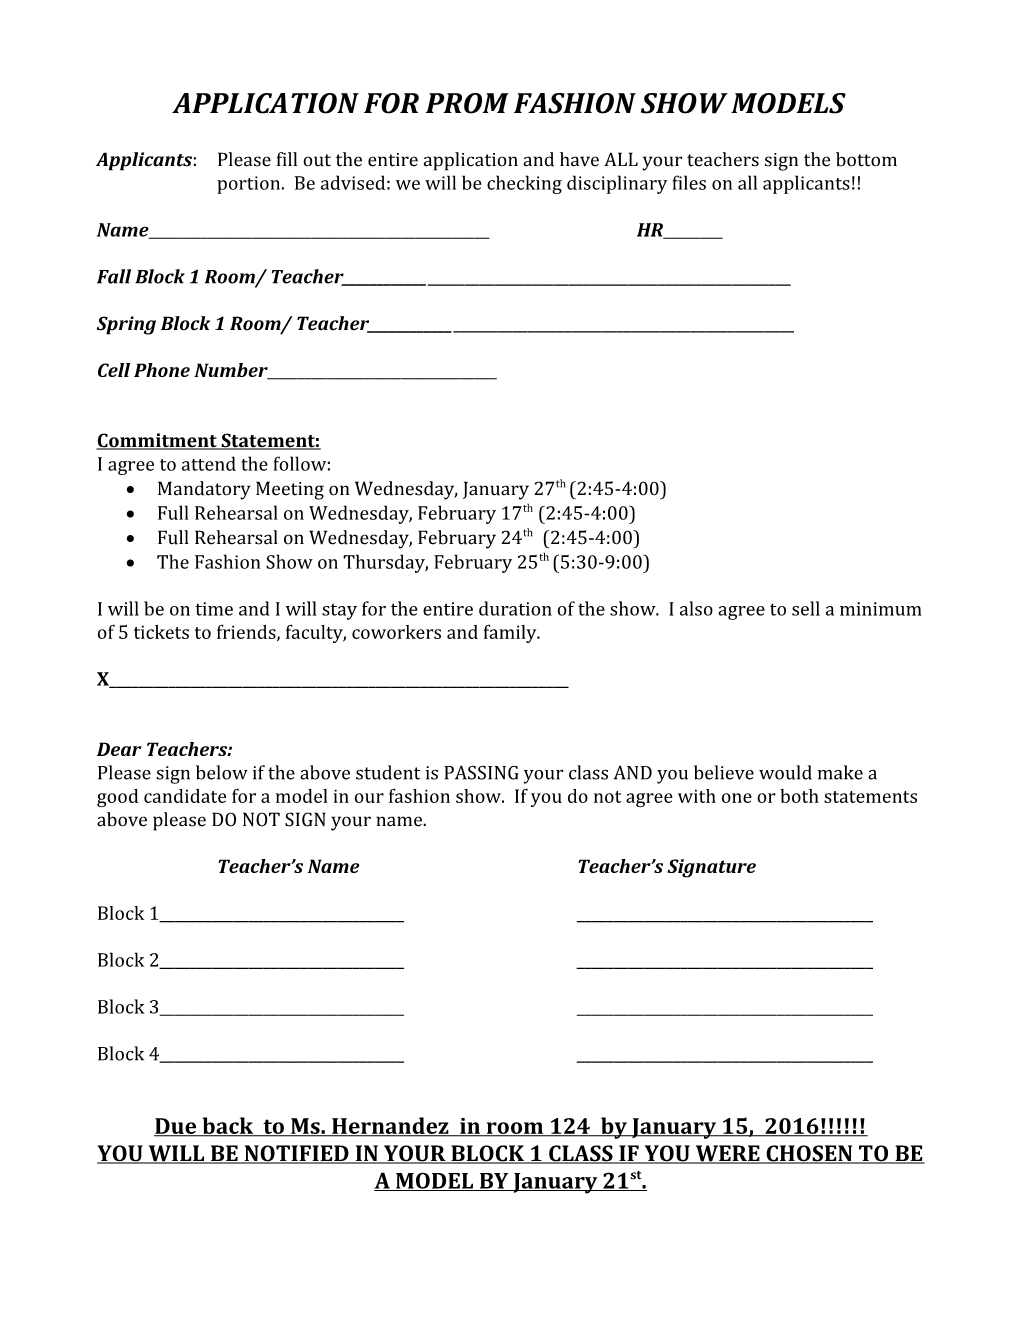 Application for Prom Fashion Show Models